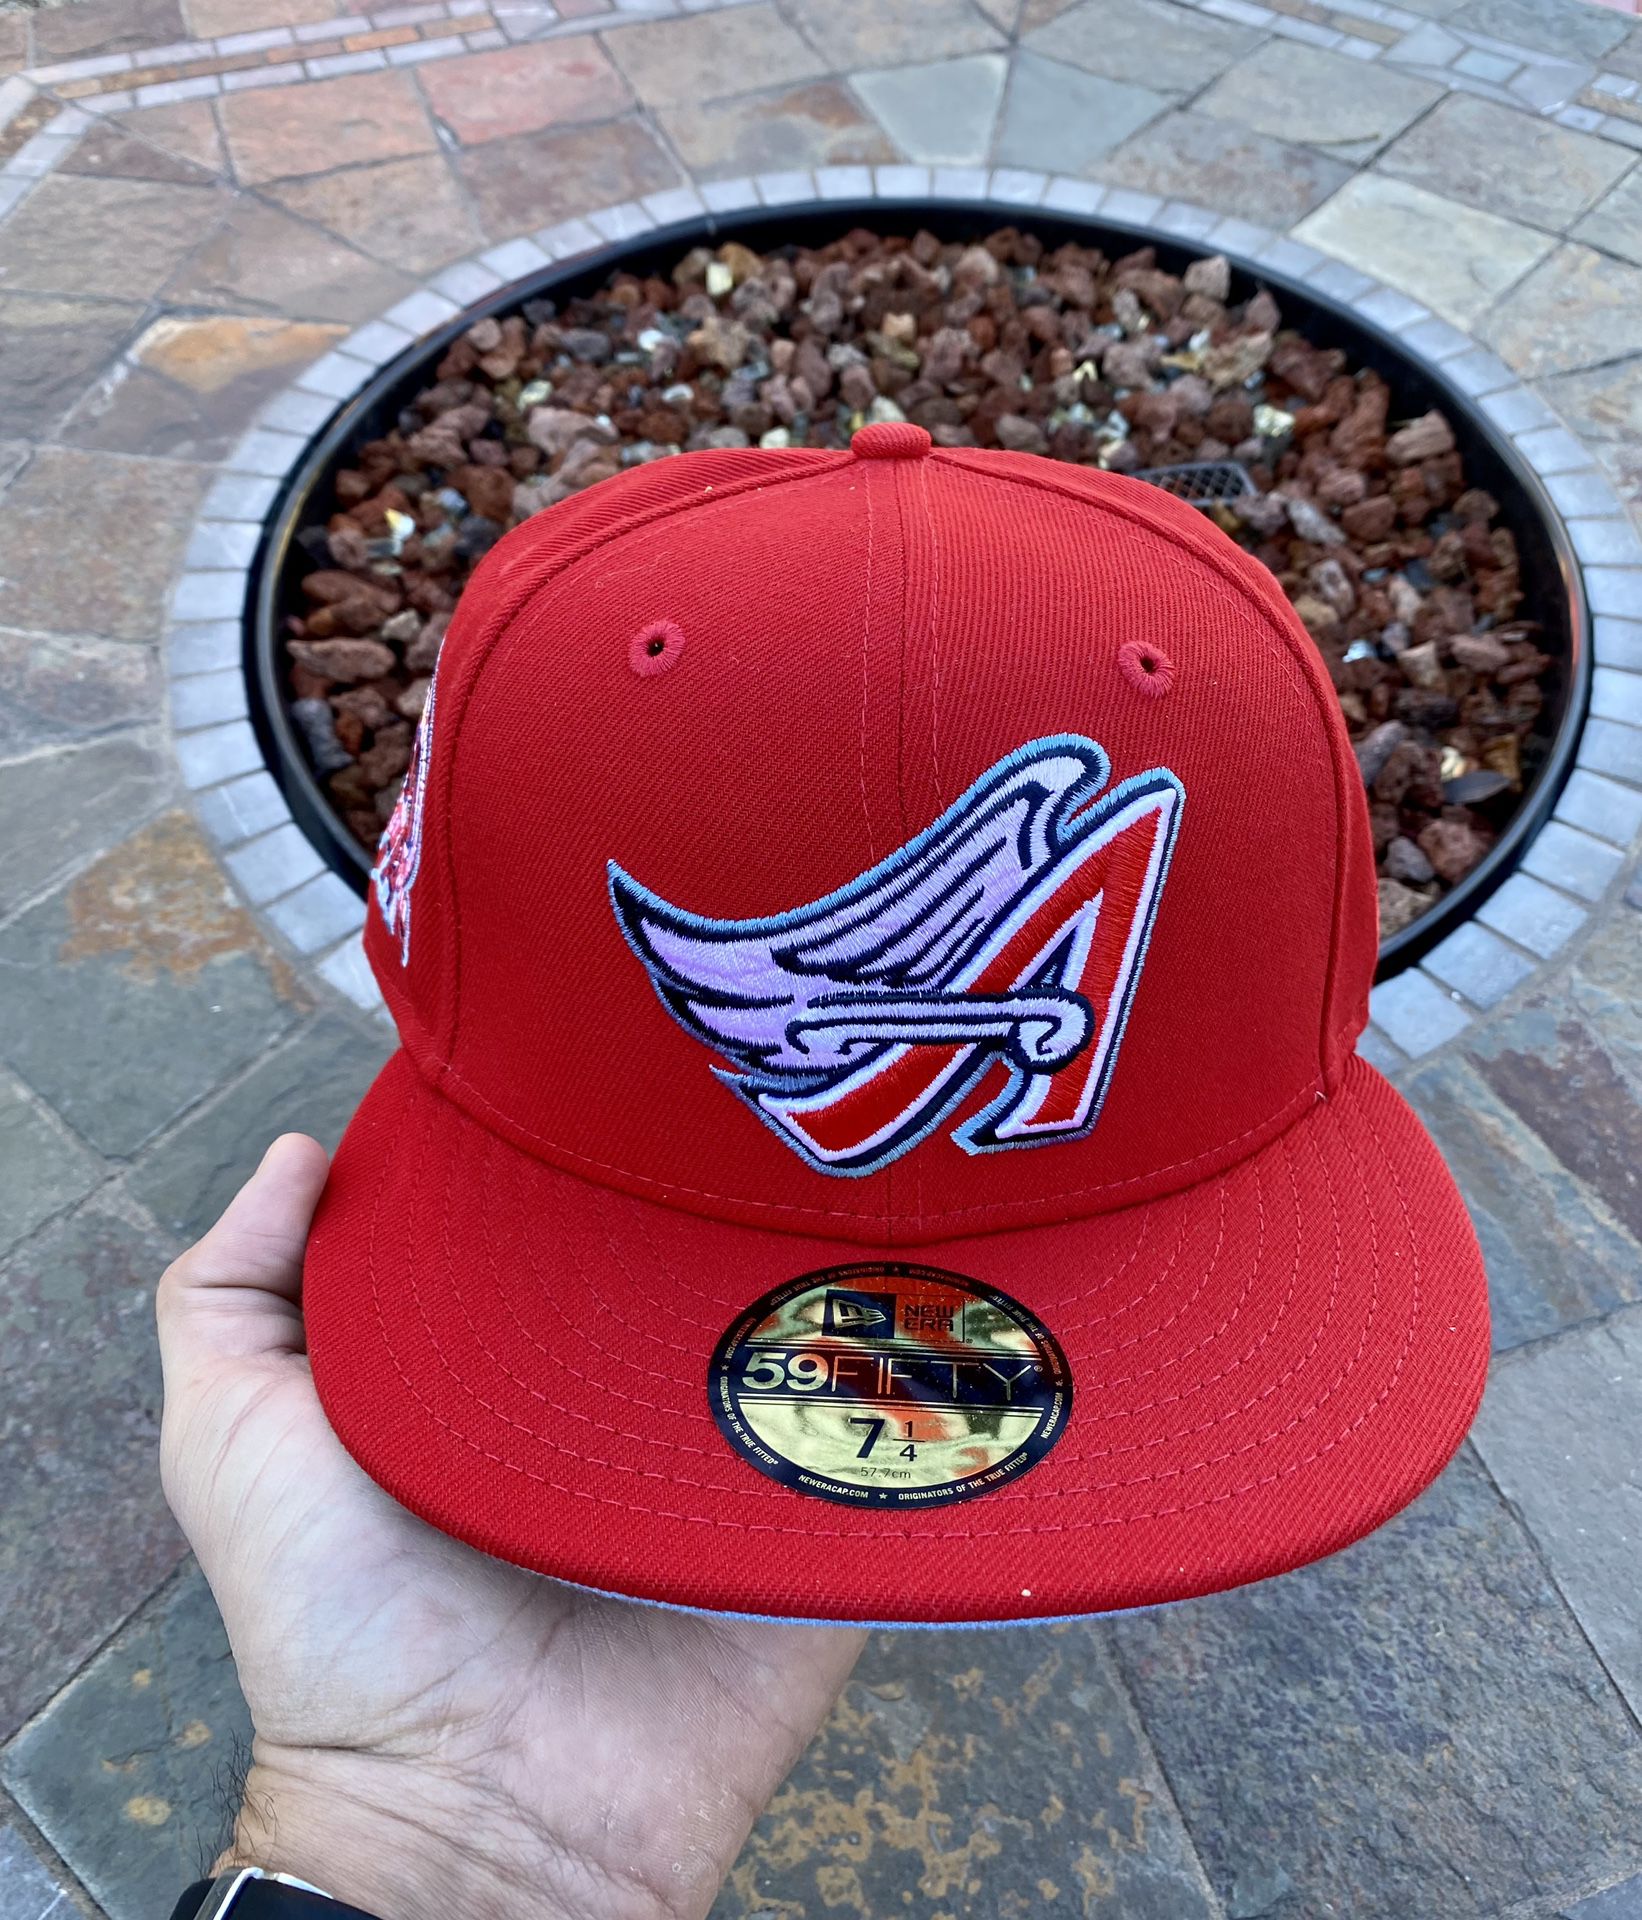 My Angels hat grail. This absolute beauty from the 50th Anniversary season.  : r/angelsbaseball